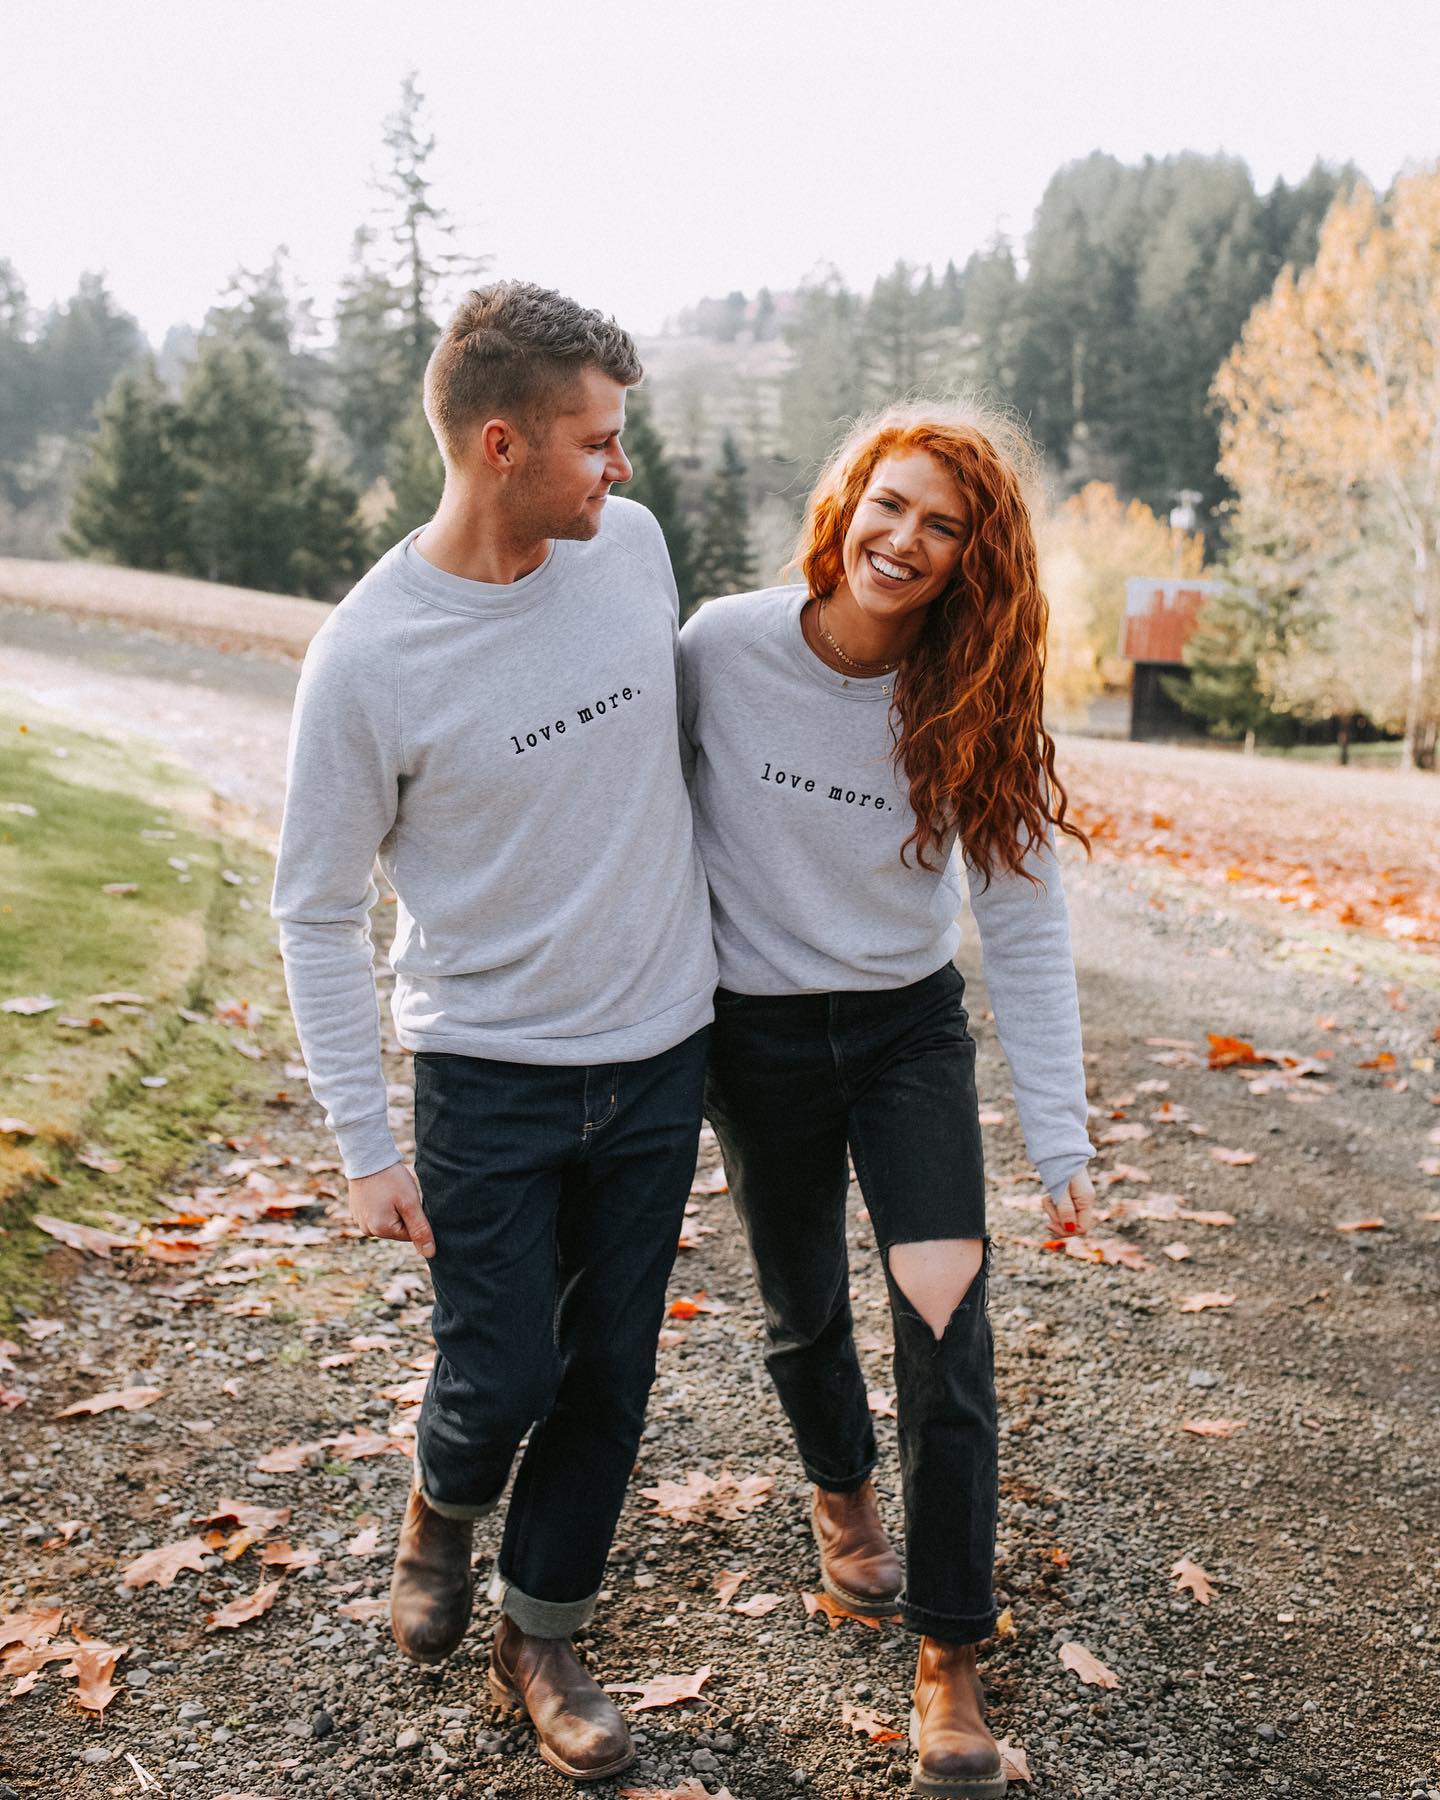 A man and a woman in matching gray sweaters